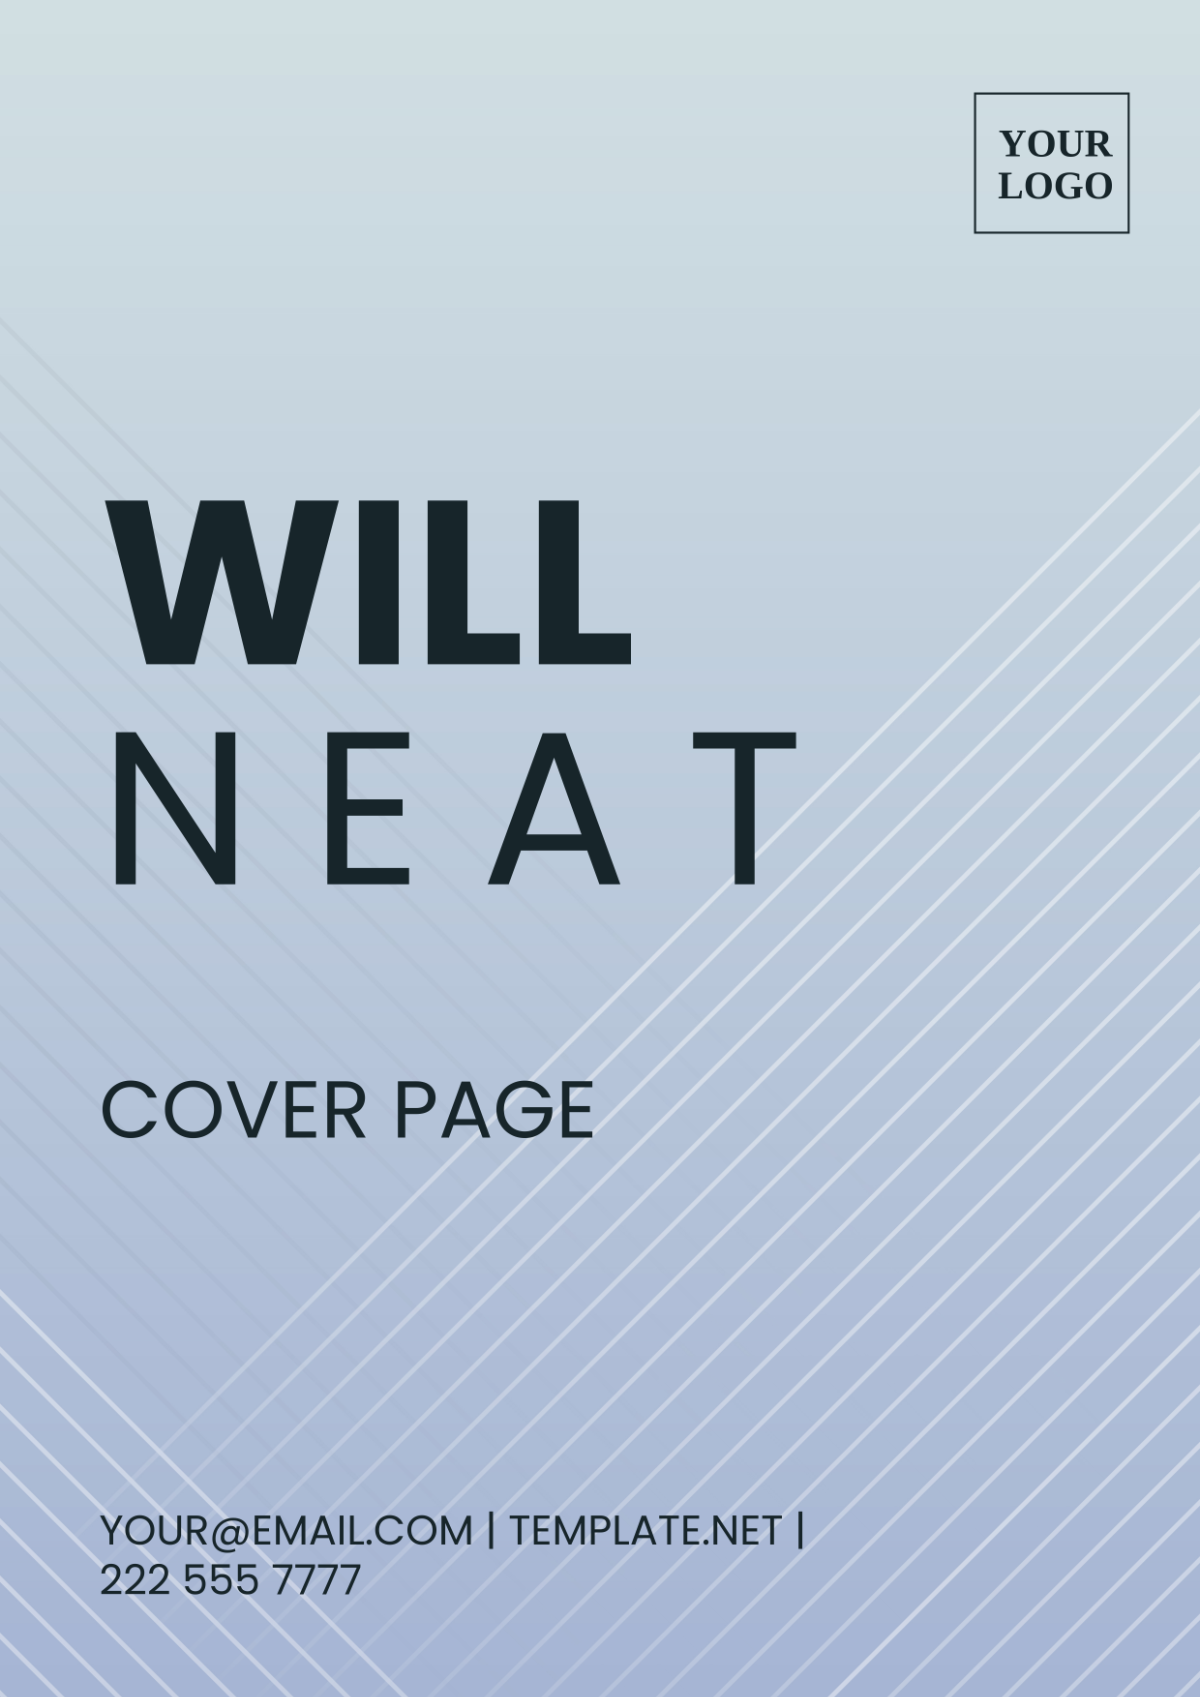 Will Neat Cover Page Template